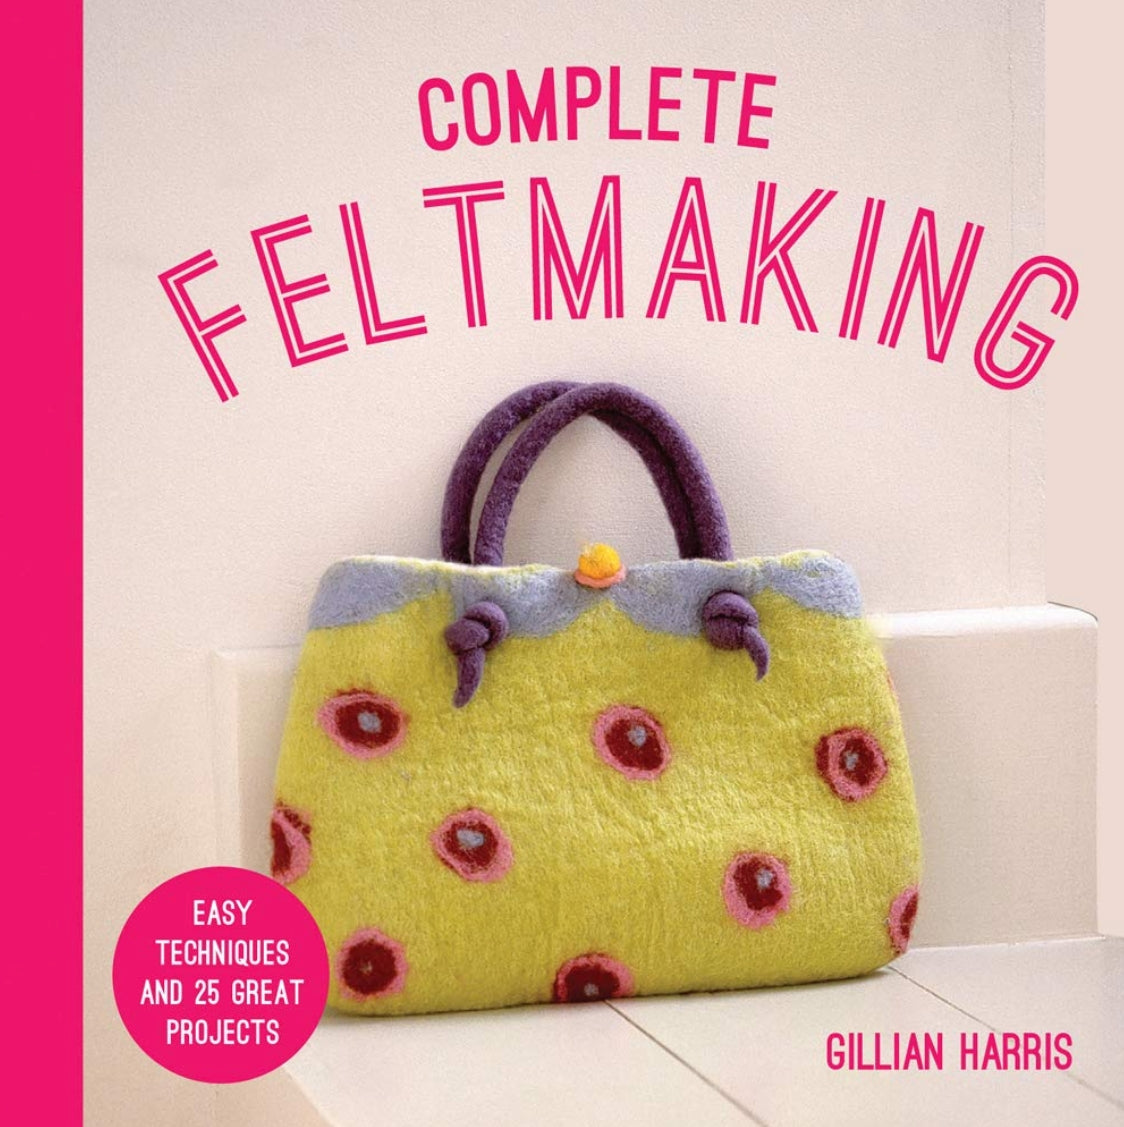 GILL - Complete Feltmaking (Signed Copy) by Gillian Harris